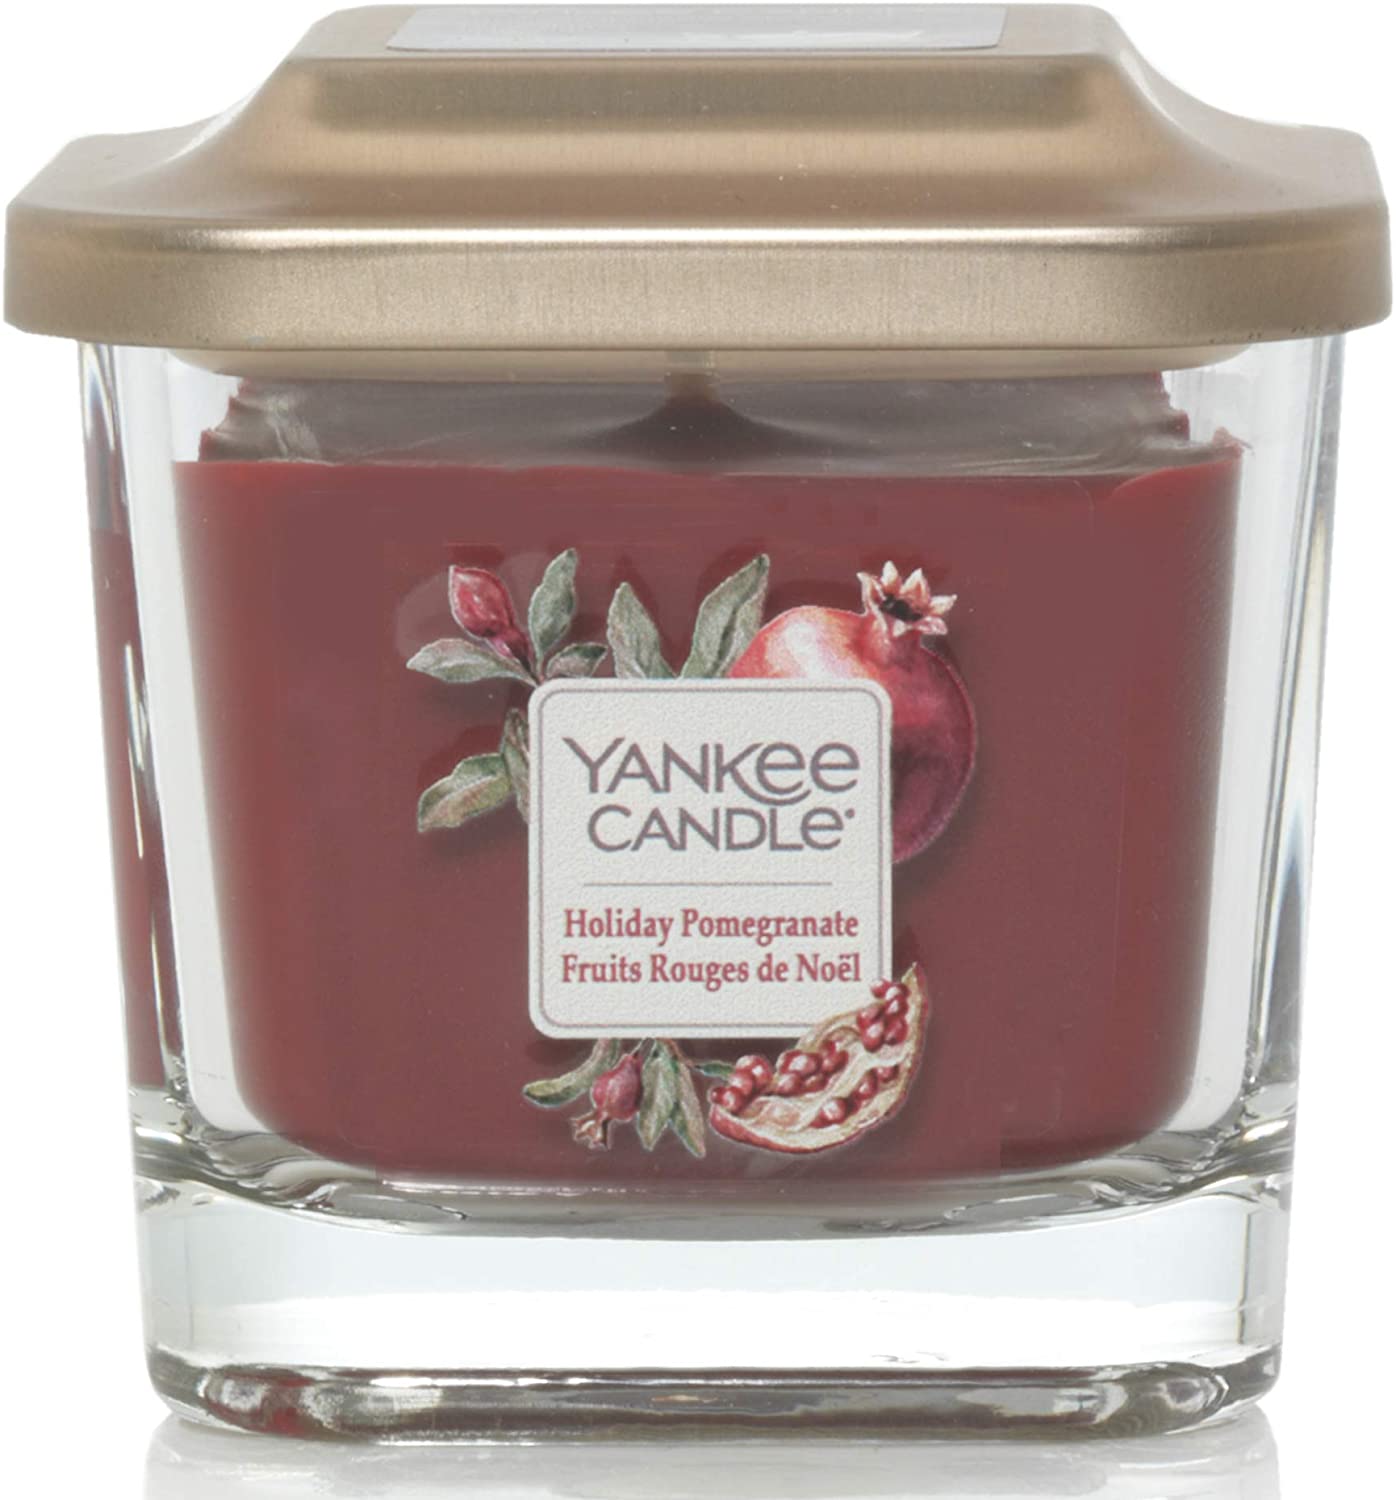 Yankee Candle Candles